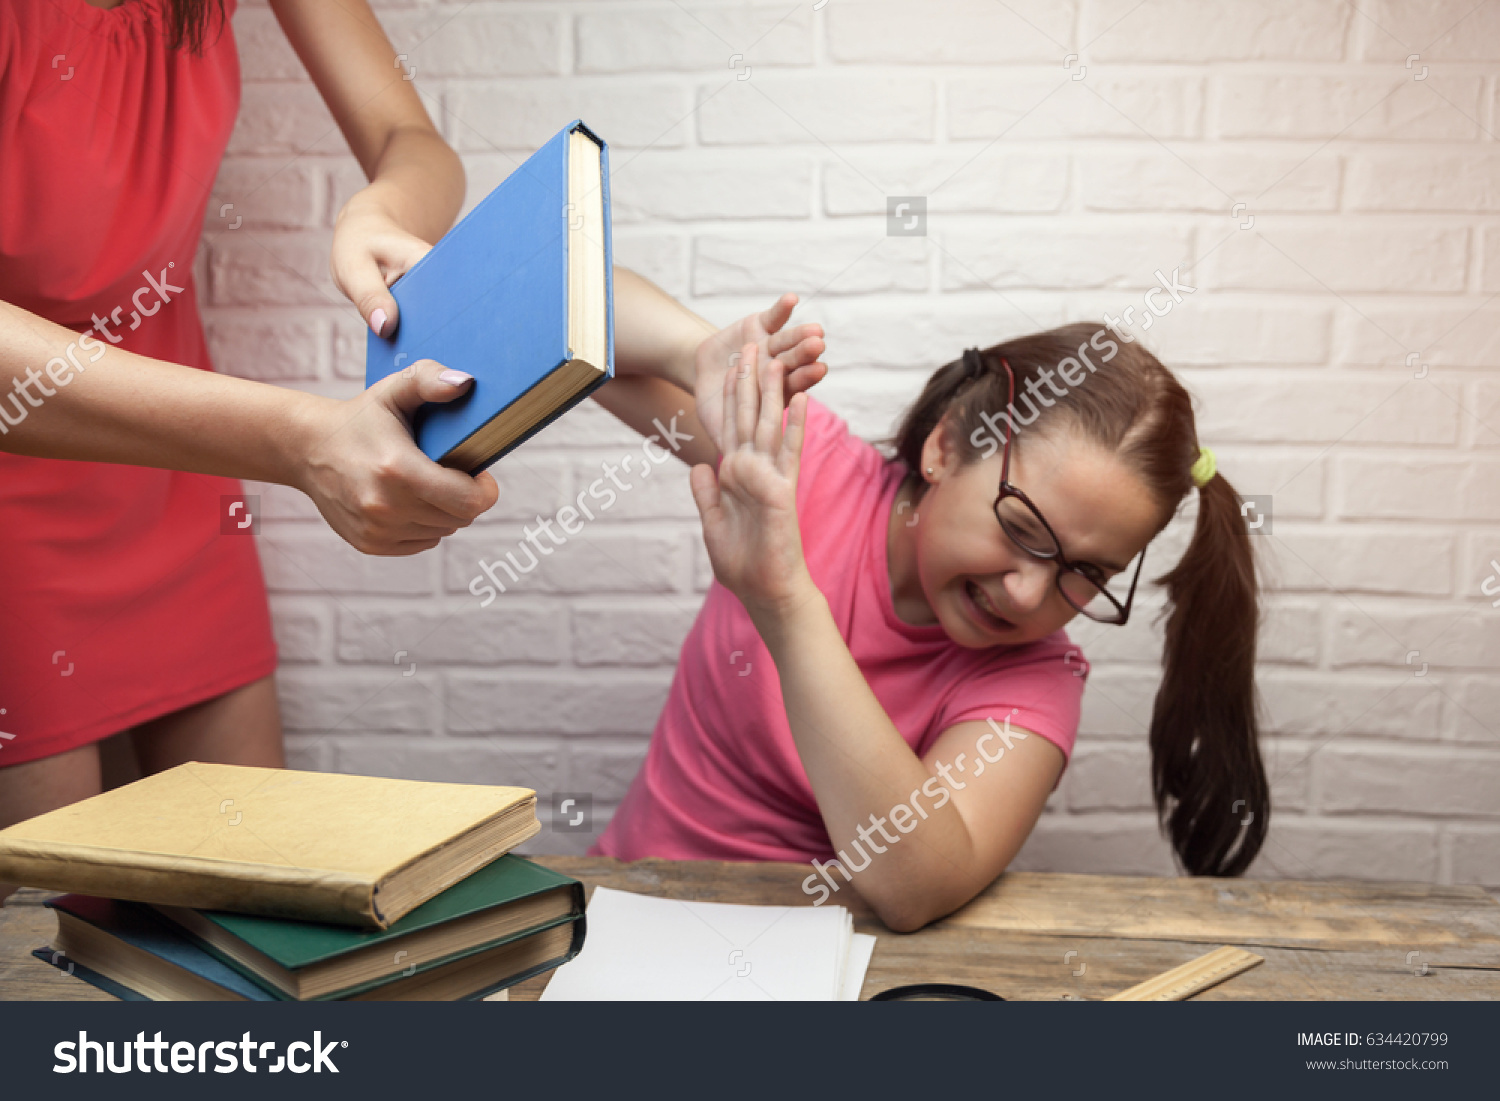 stock-photo-the-mother-beats-her-daughter-with-book-for-lessons-634420799